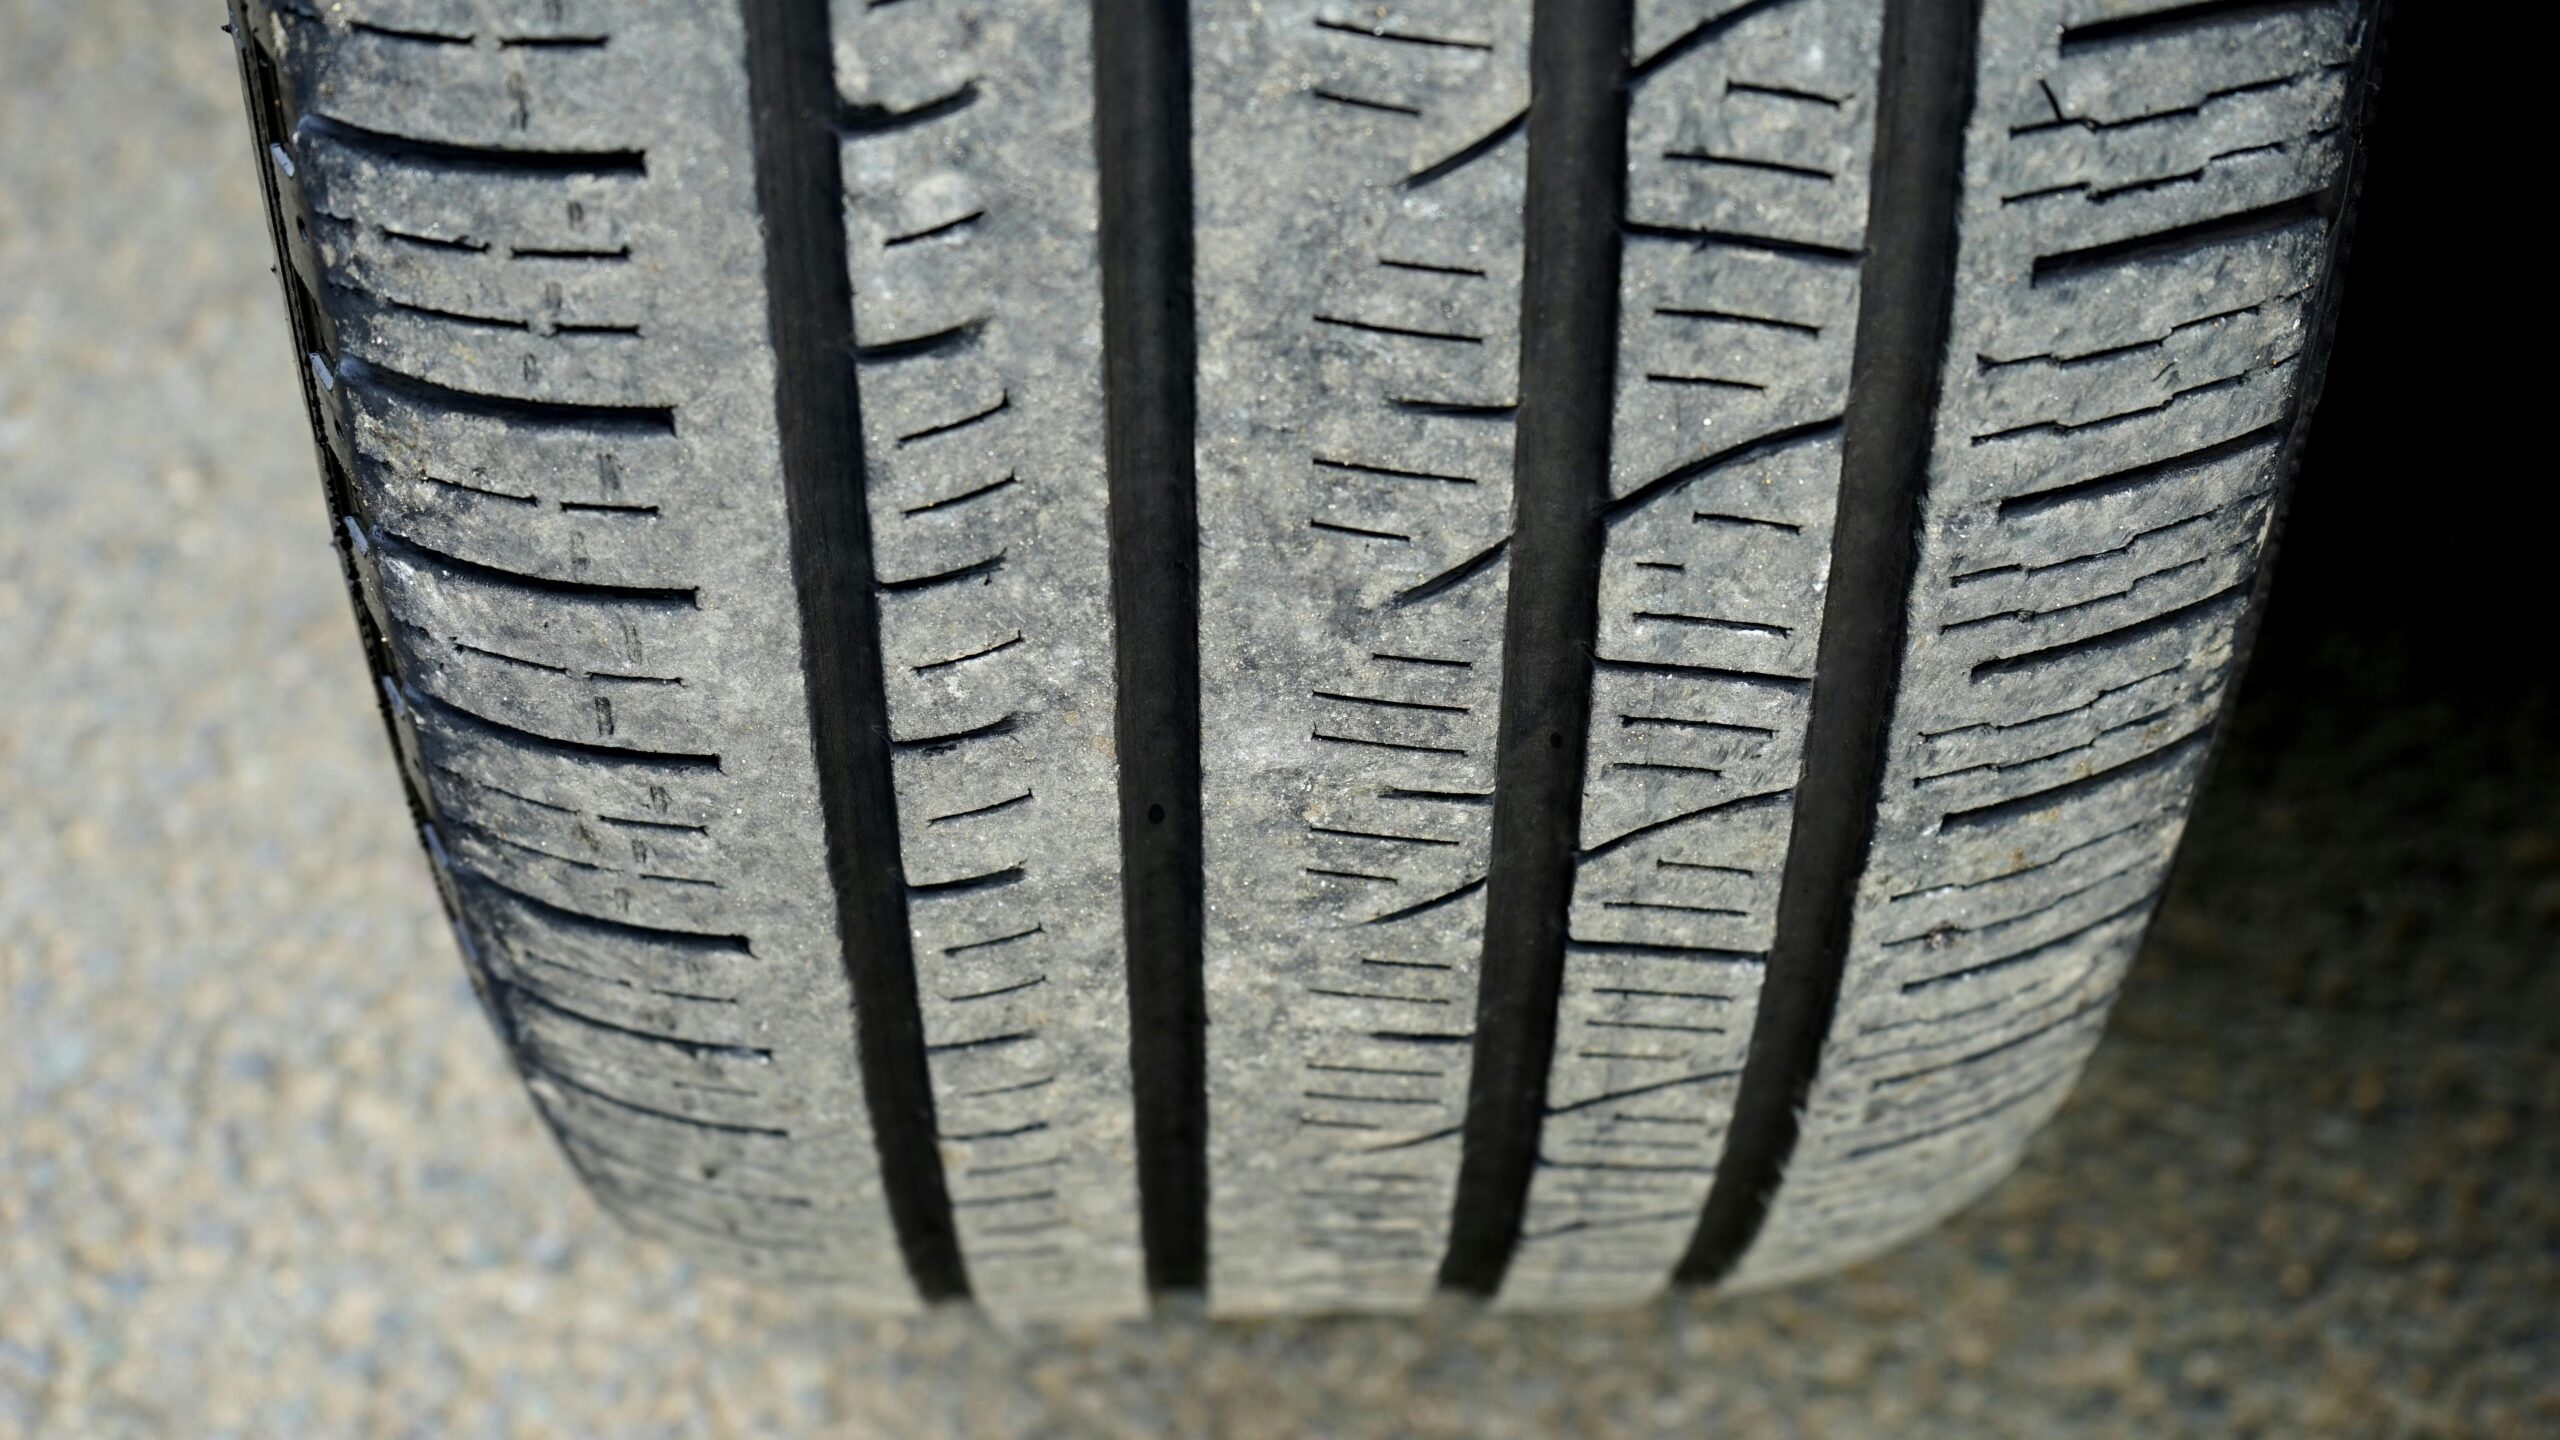 Filing an Injury Claim for Defective Tires